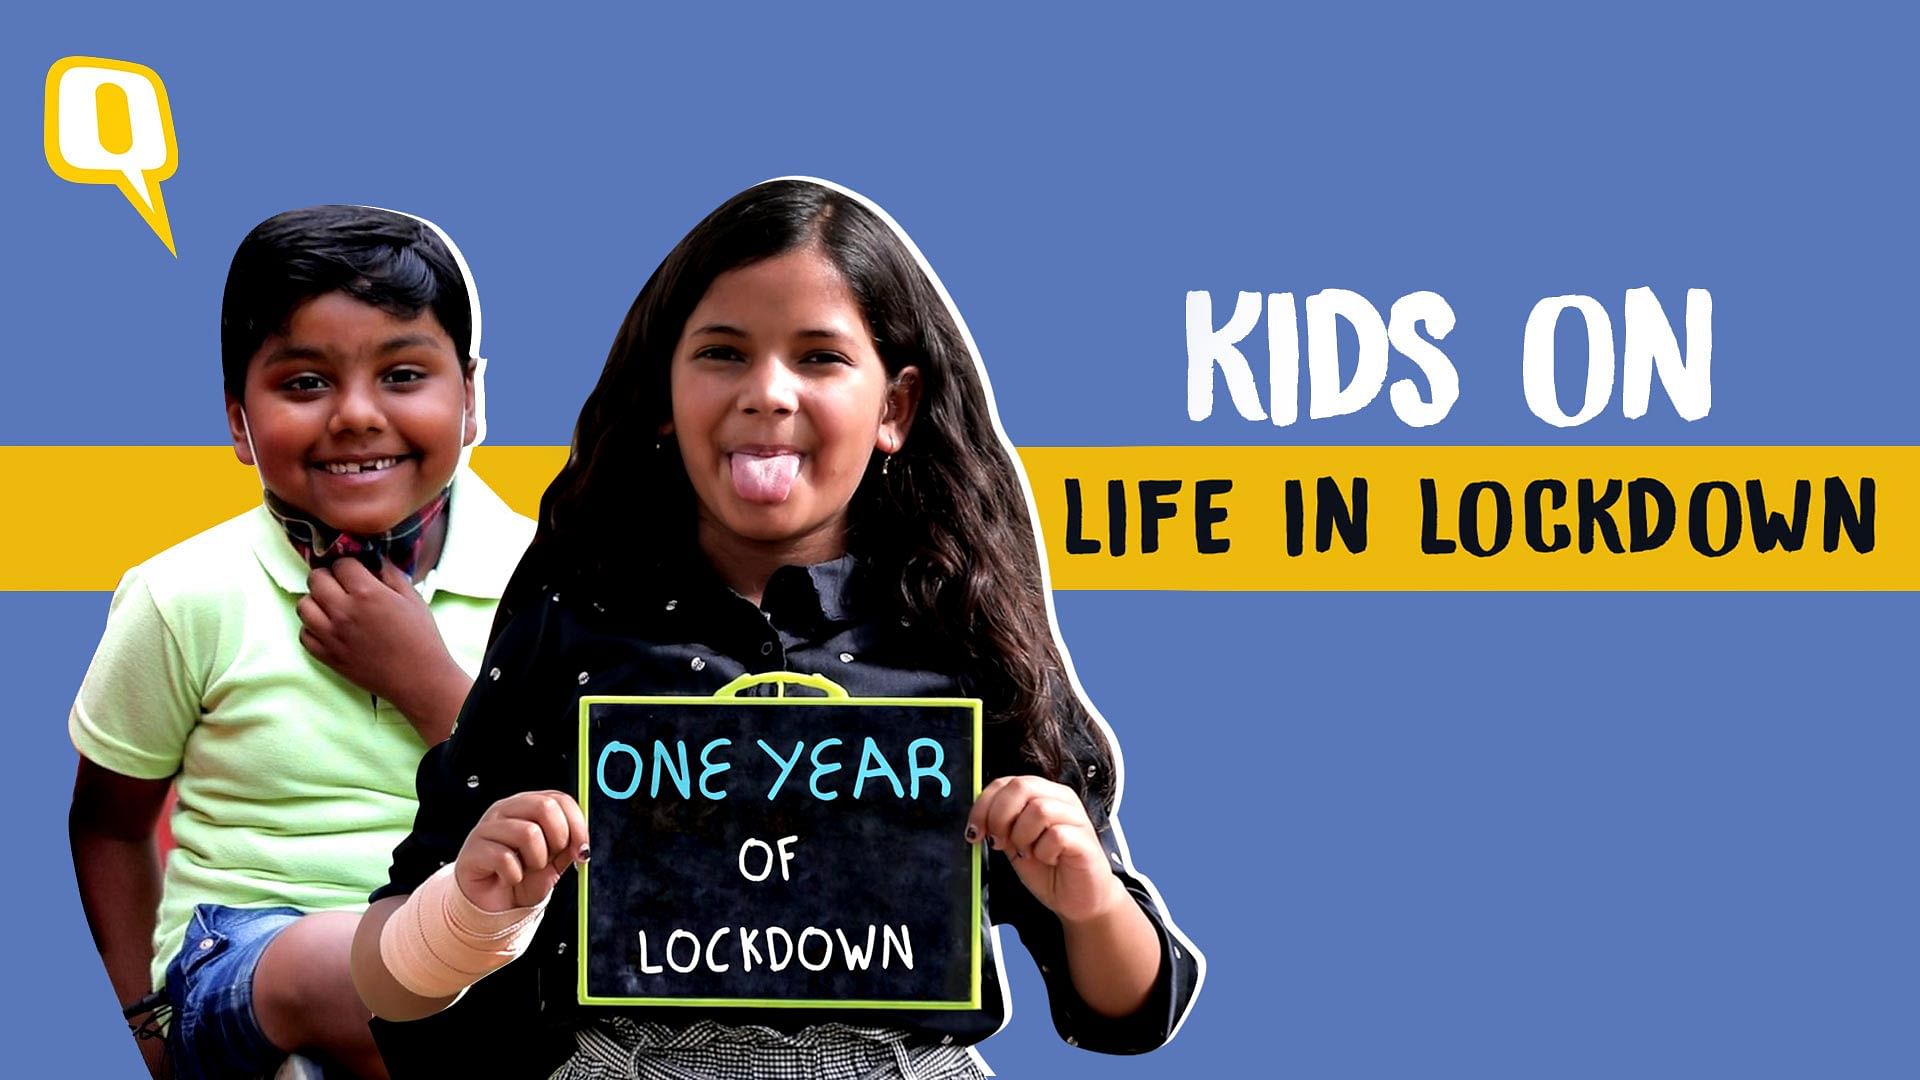 Kids talk about their life during the lockdown.